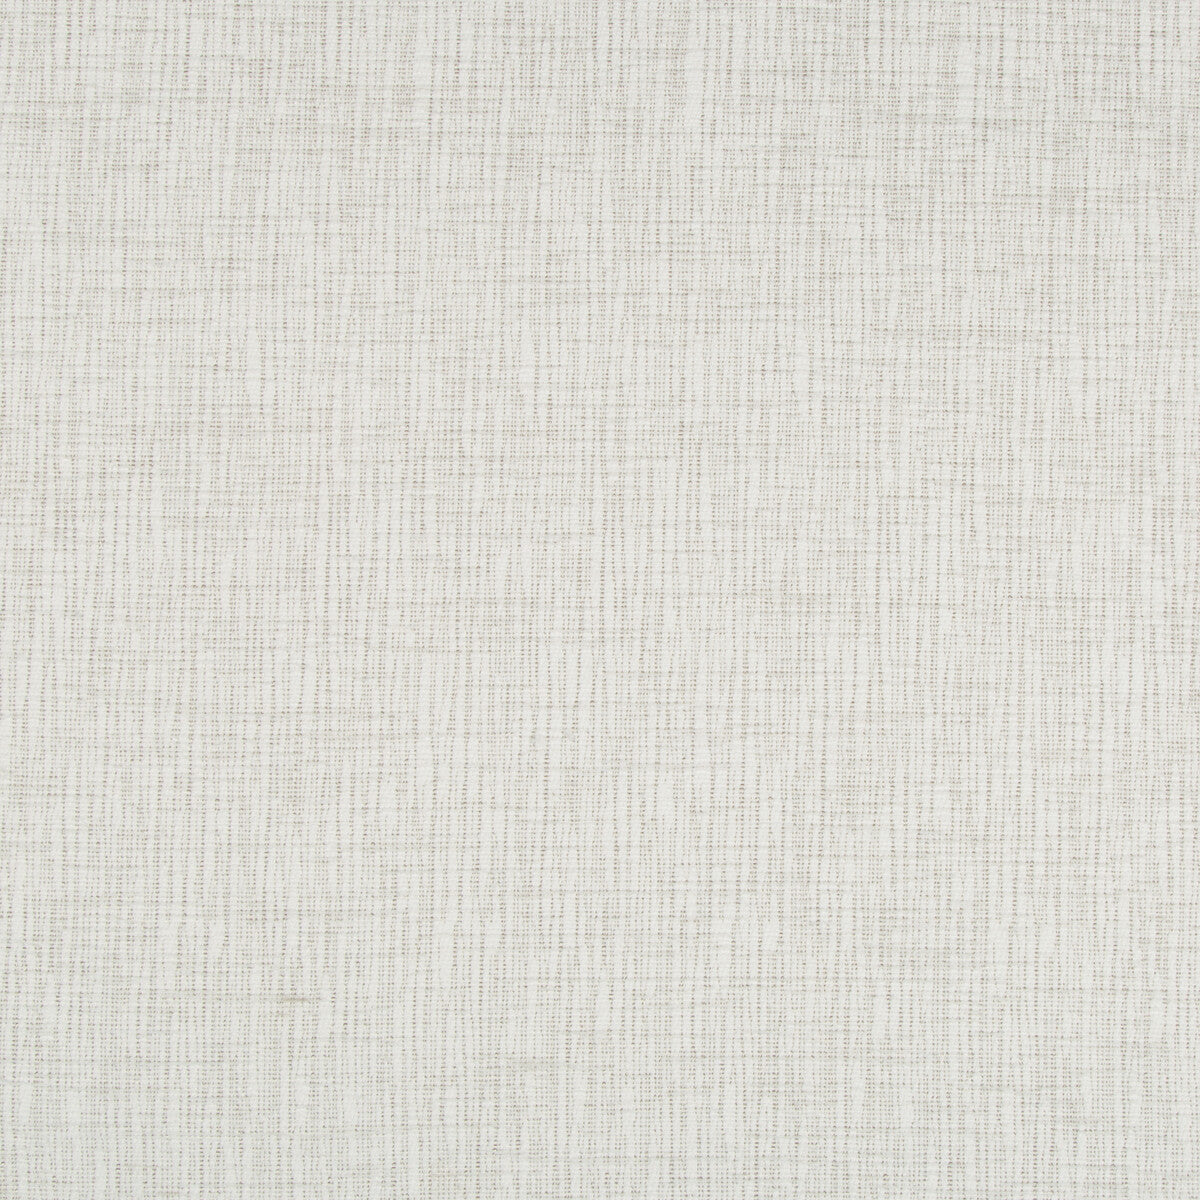 Mysto fabric in oyster color - pattern 35003.11.0 - by Kravet Basics in the Jeffrey Alan Marks Oceanview collection